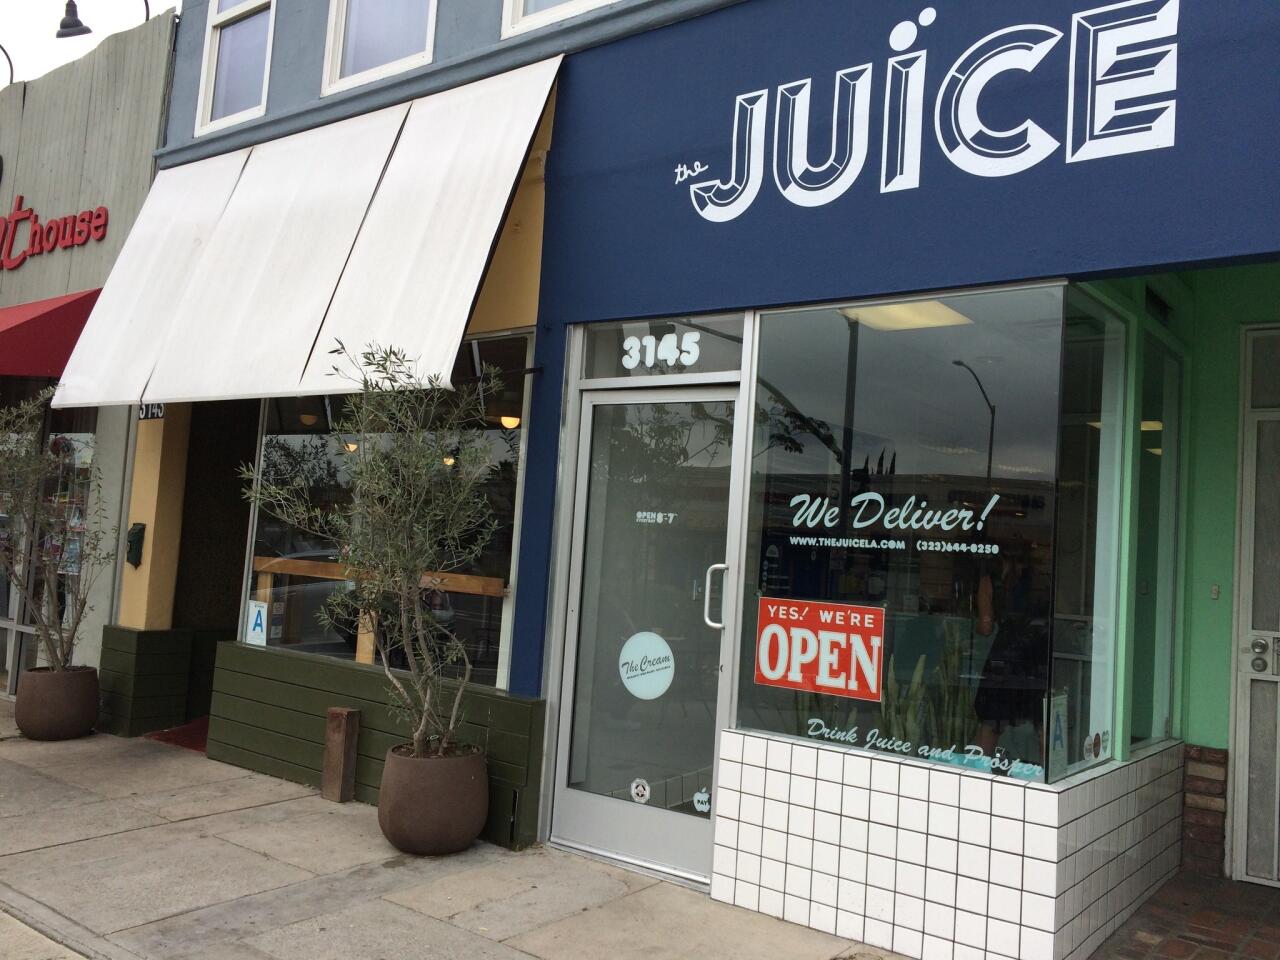 The Juice in Atwater Village